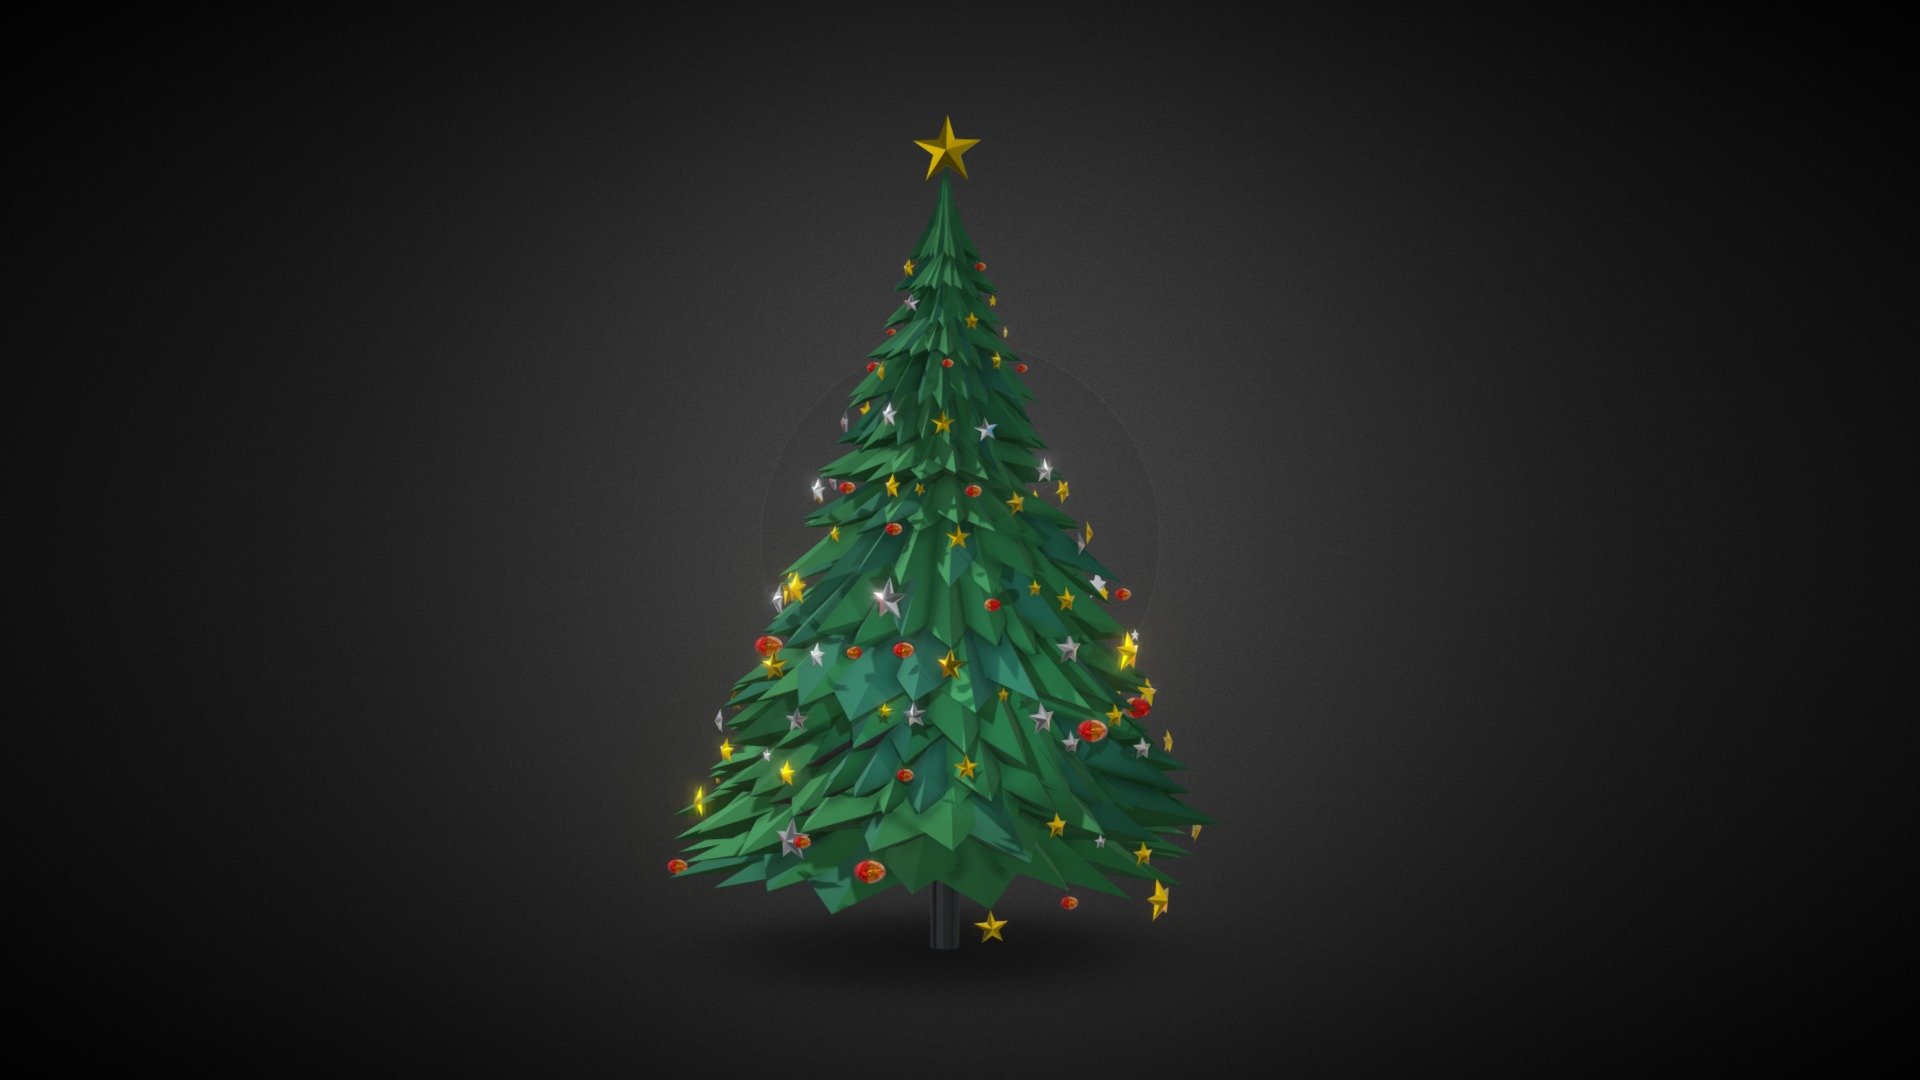 Polygonal Christmas Pine decorated with shiny metallic stars and spheres (gold and silver) for your festive holiday decorations.
Low poly count, curated materials but no textures for best performance 3d model